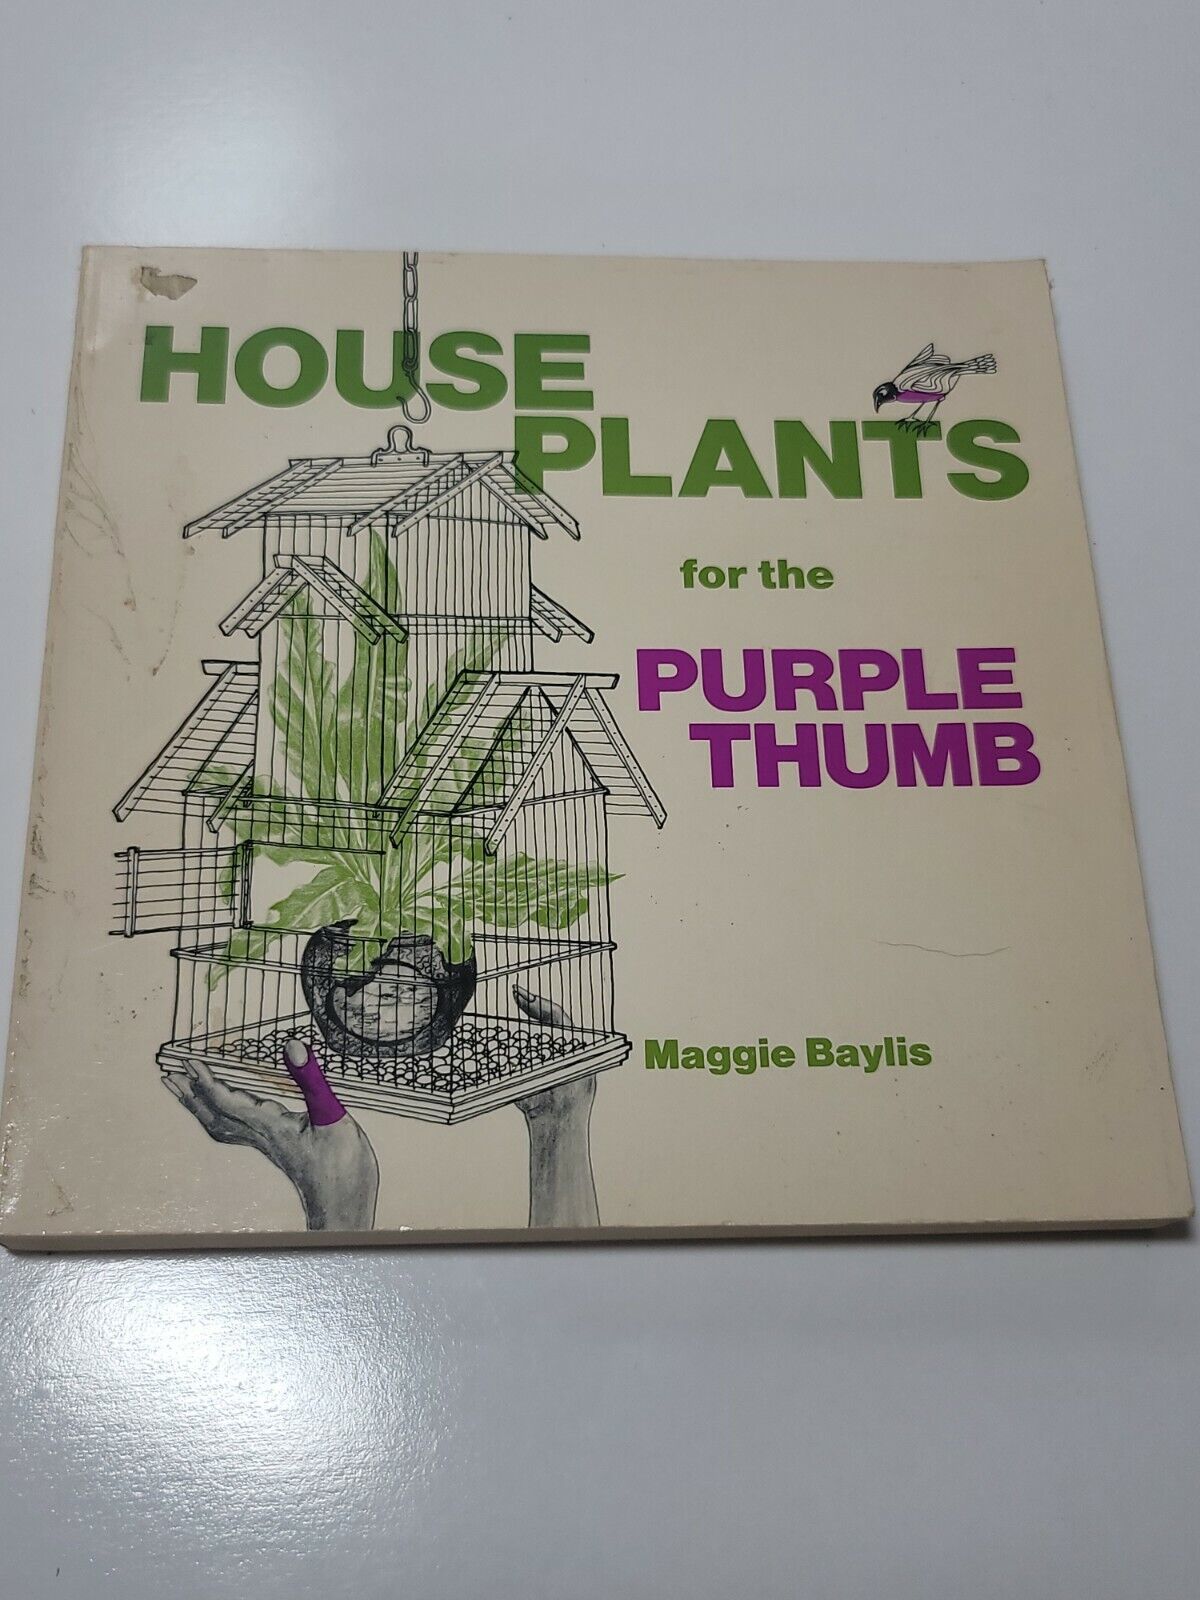 Primary image for House Plants for the Purple Thumb by Maggie Baylis (1974, Paperback) Vintage